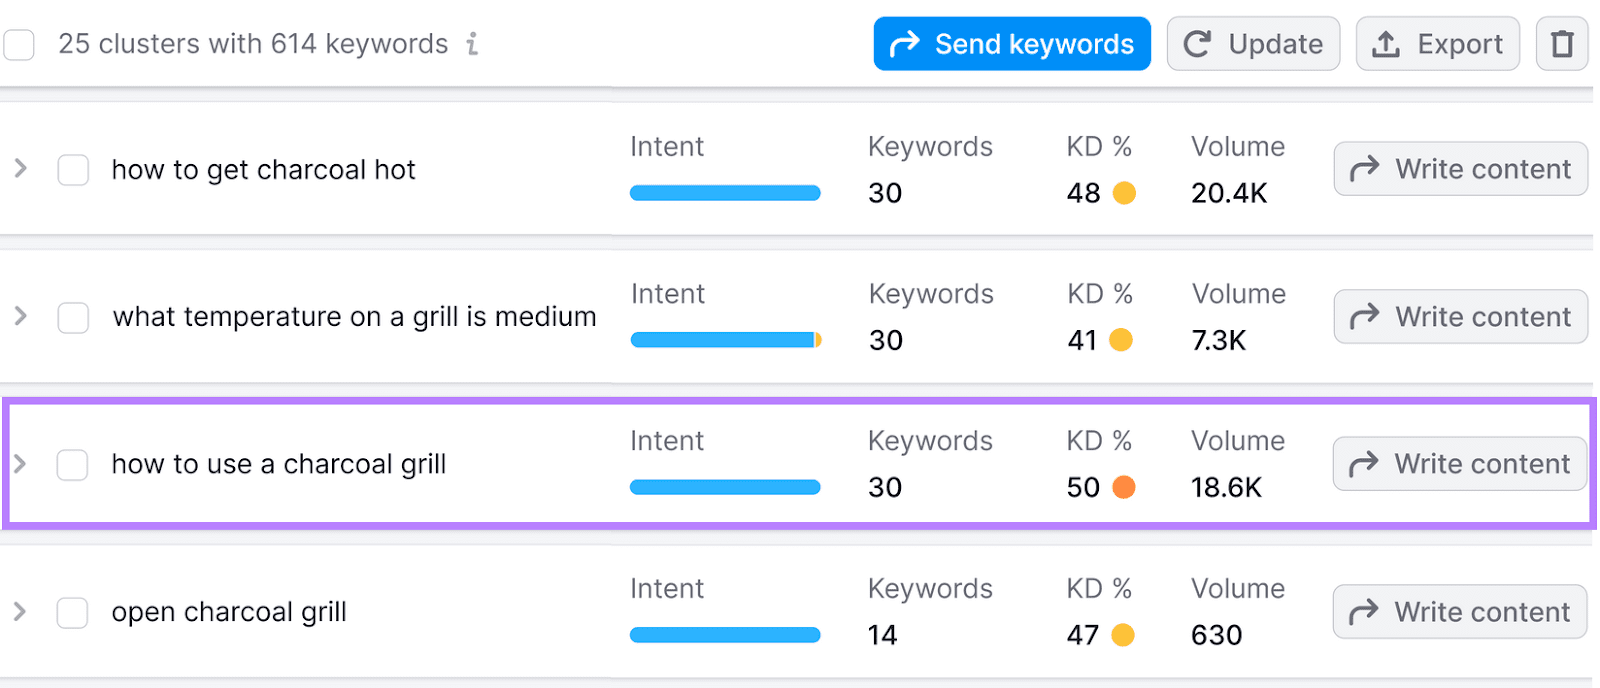 Keyword Manager interface showing subtopic clusters with accompanying intent, keyword count, etc., and focusing on one subtopic.